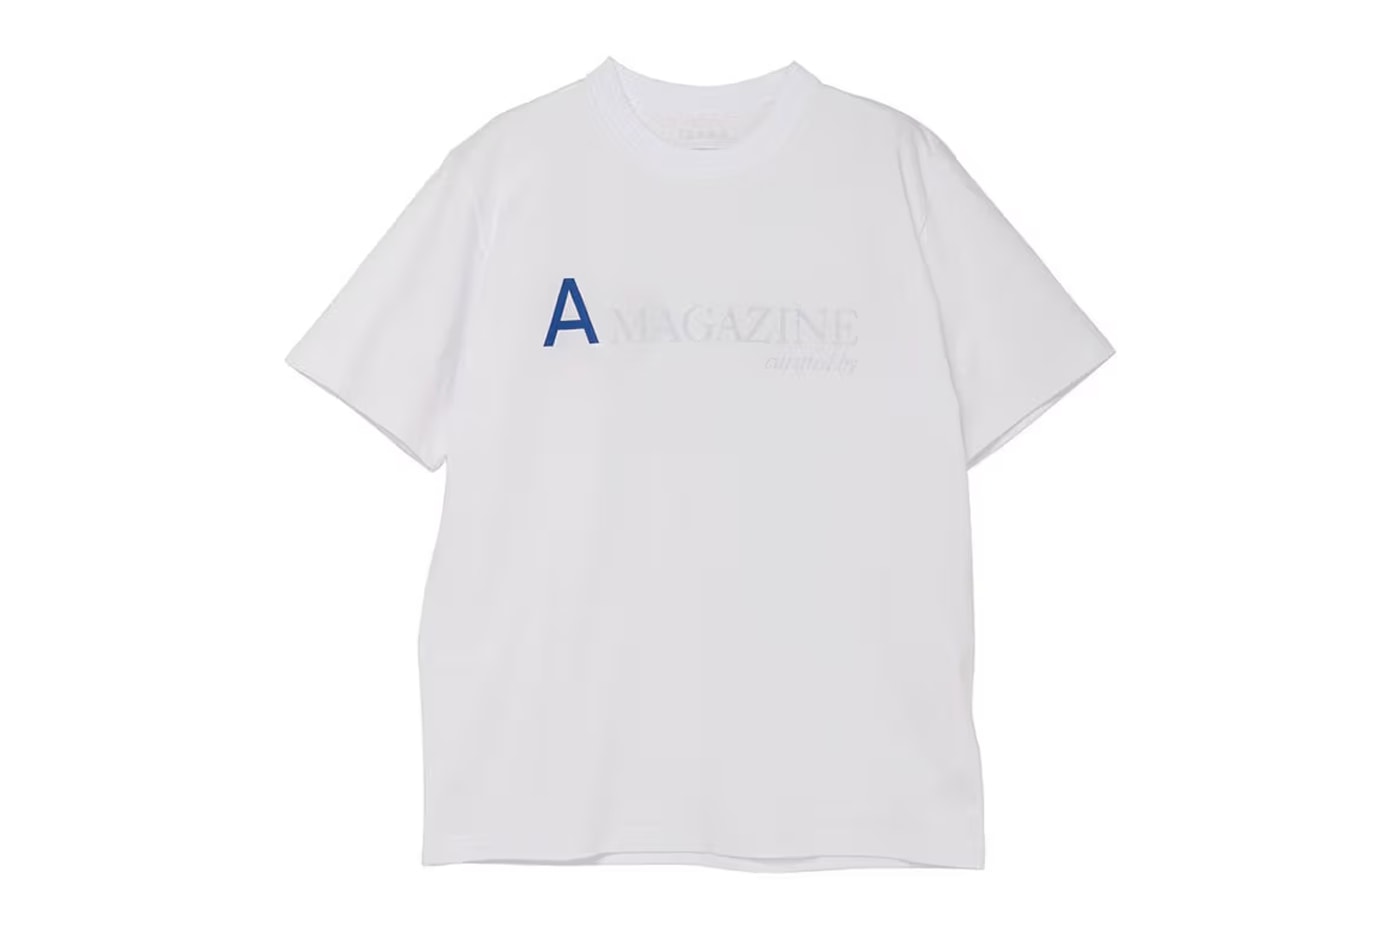 a magazine curated by sacai tees release info store list buying guide photos price 